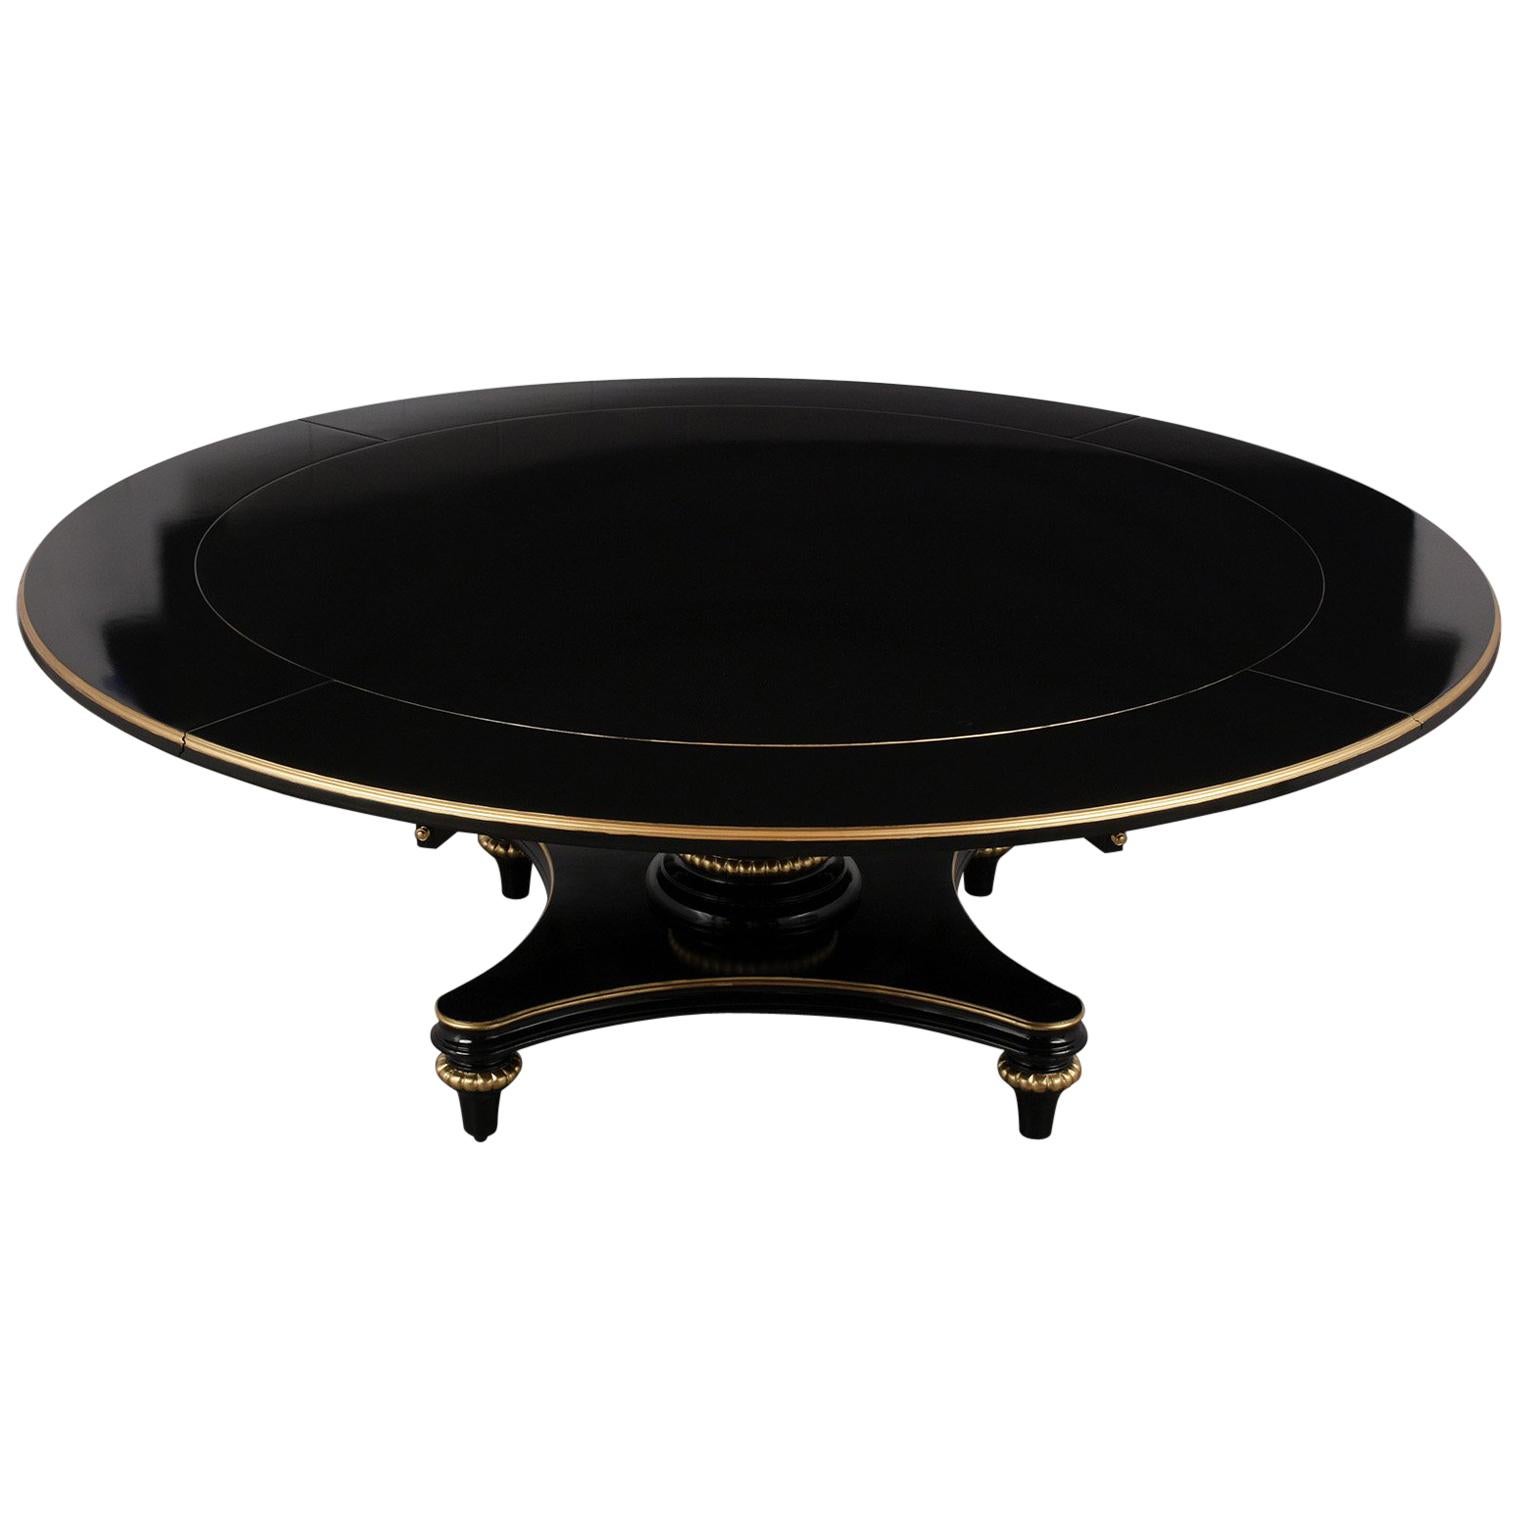 Lacquered 1970s Regency Round Dining Table with Extensions